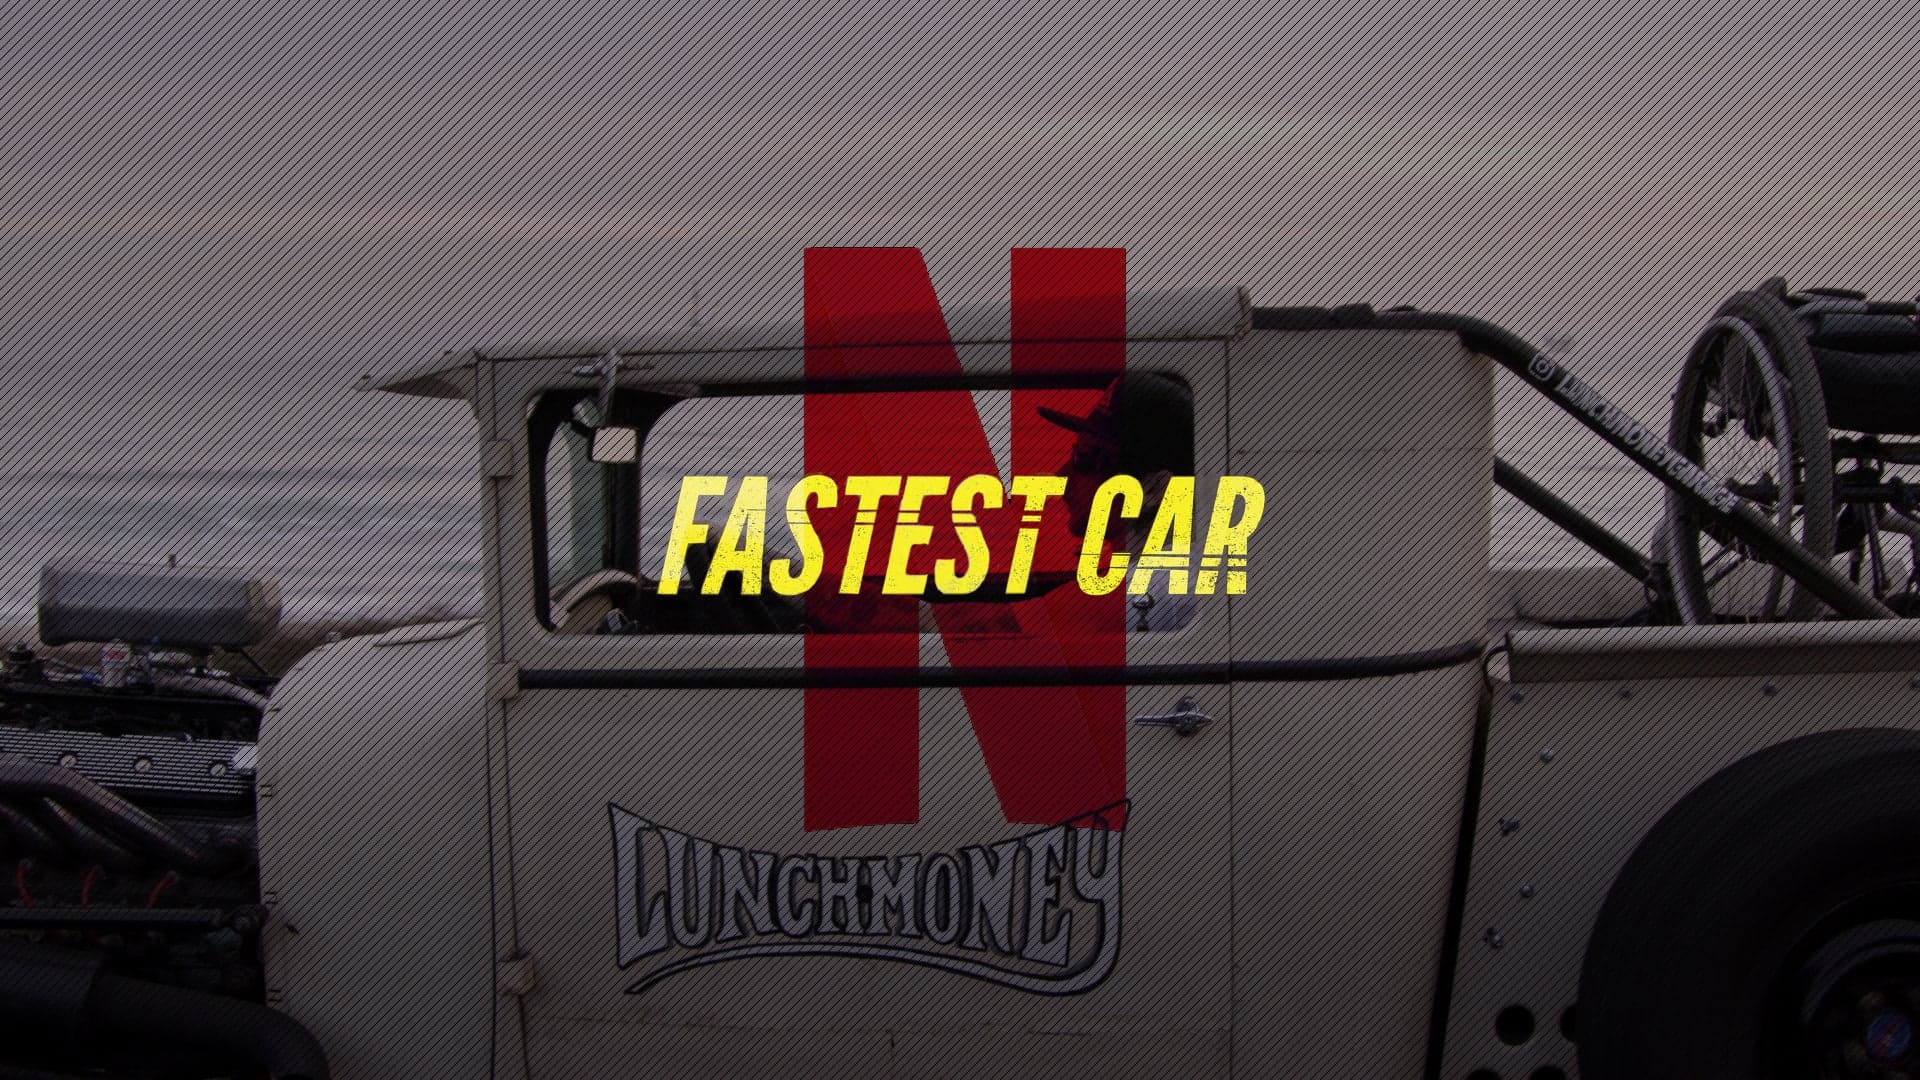 New Netflix Series Fastest Car Puts Super Builds Up Against Supercars